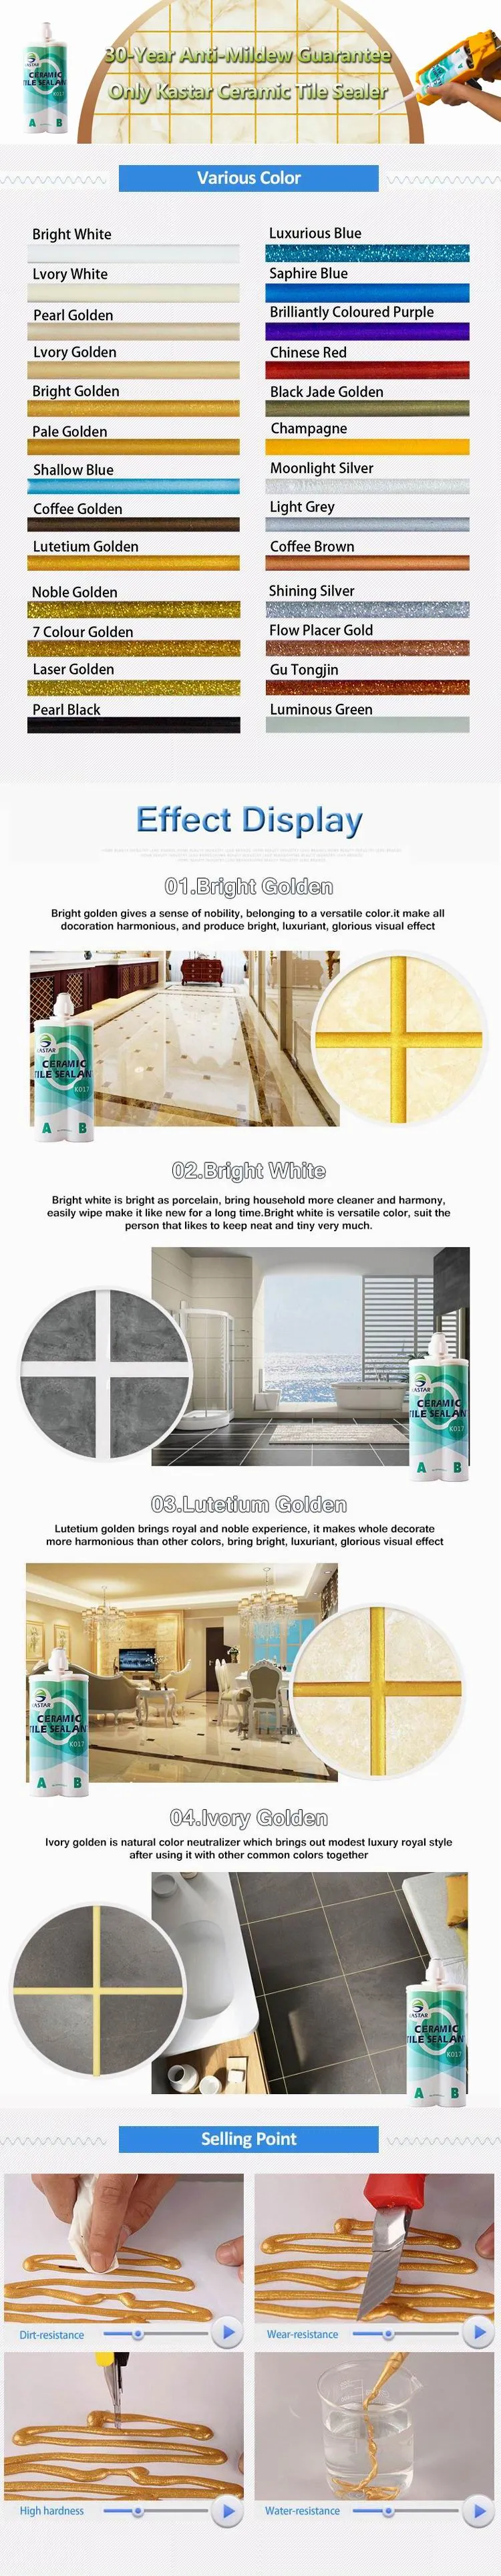 Insulation Epoxy Resin Ab Adhesive for Building Structural